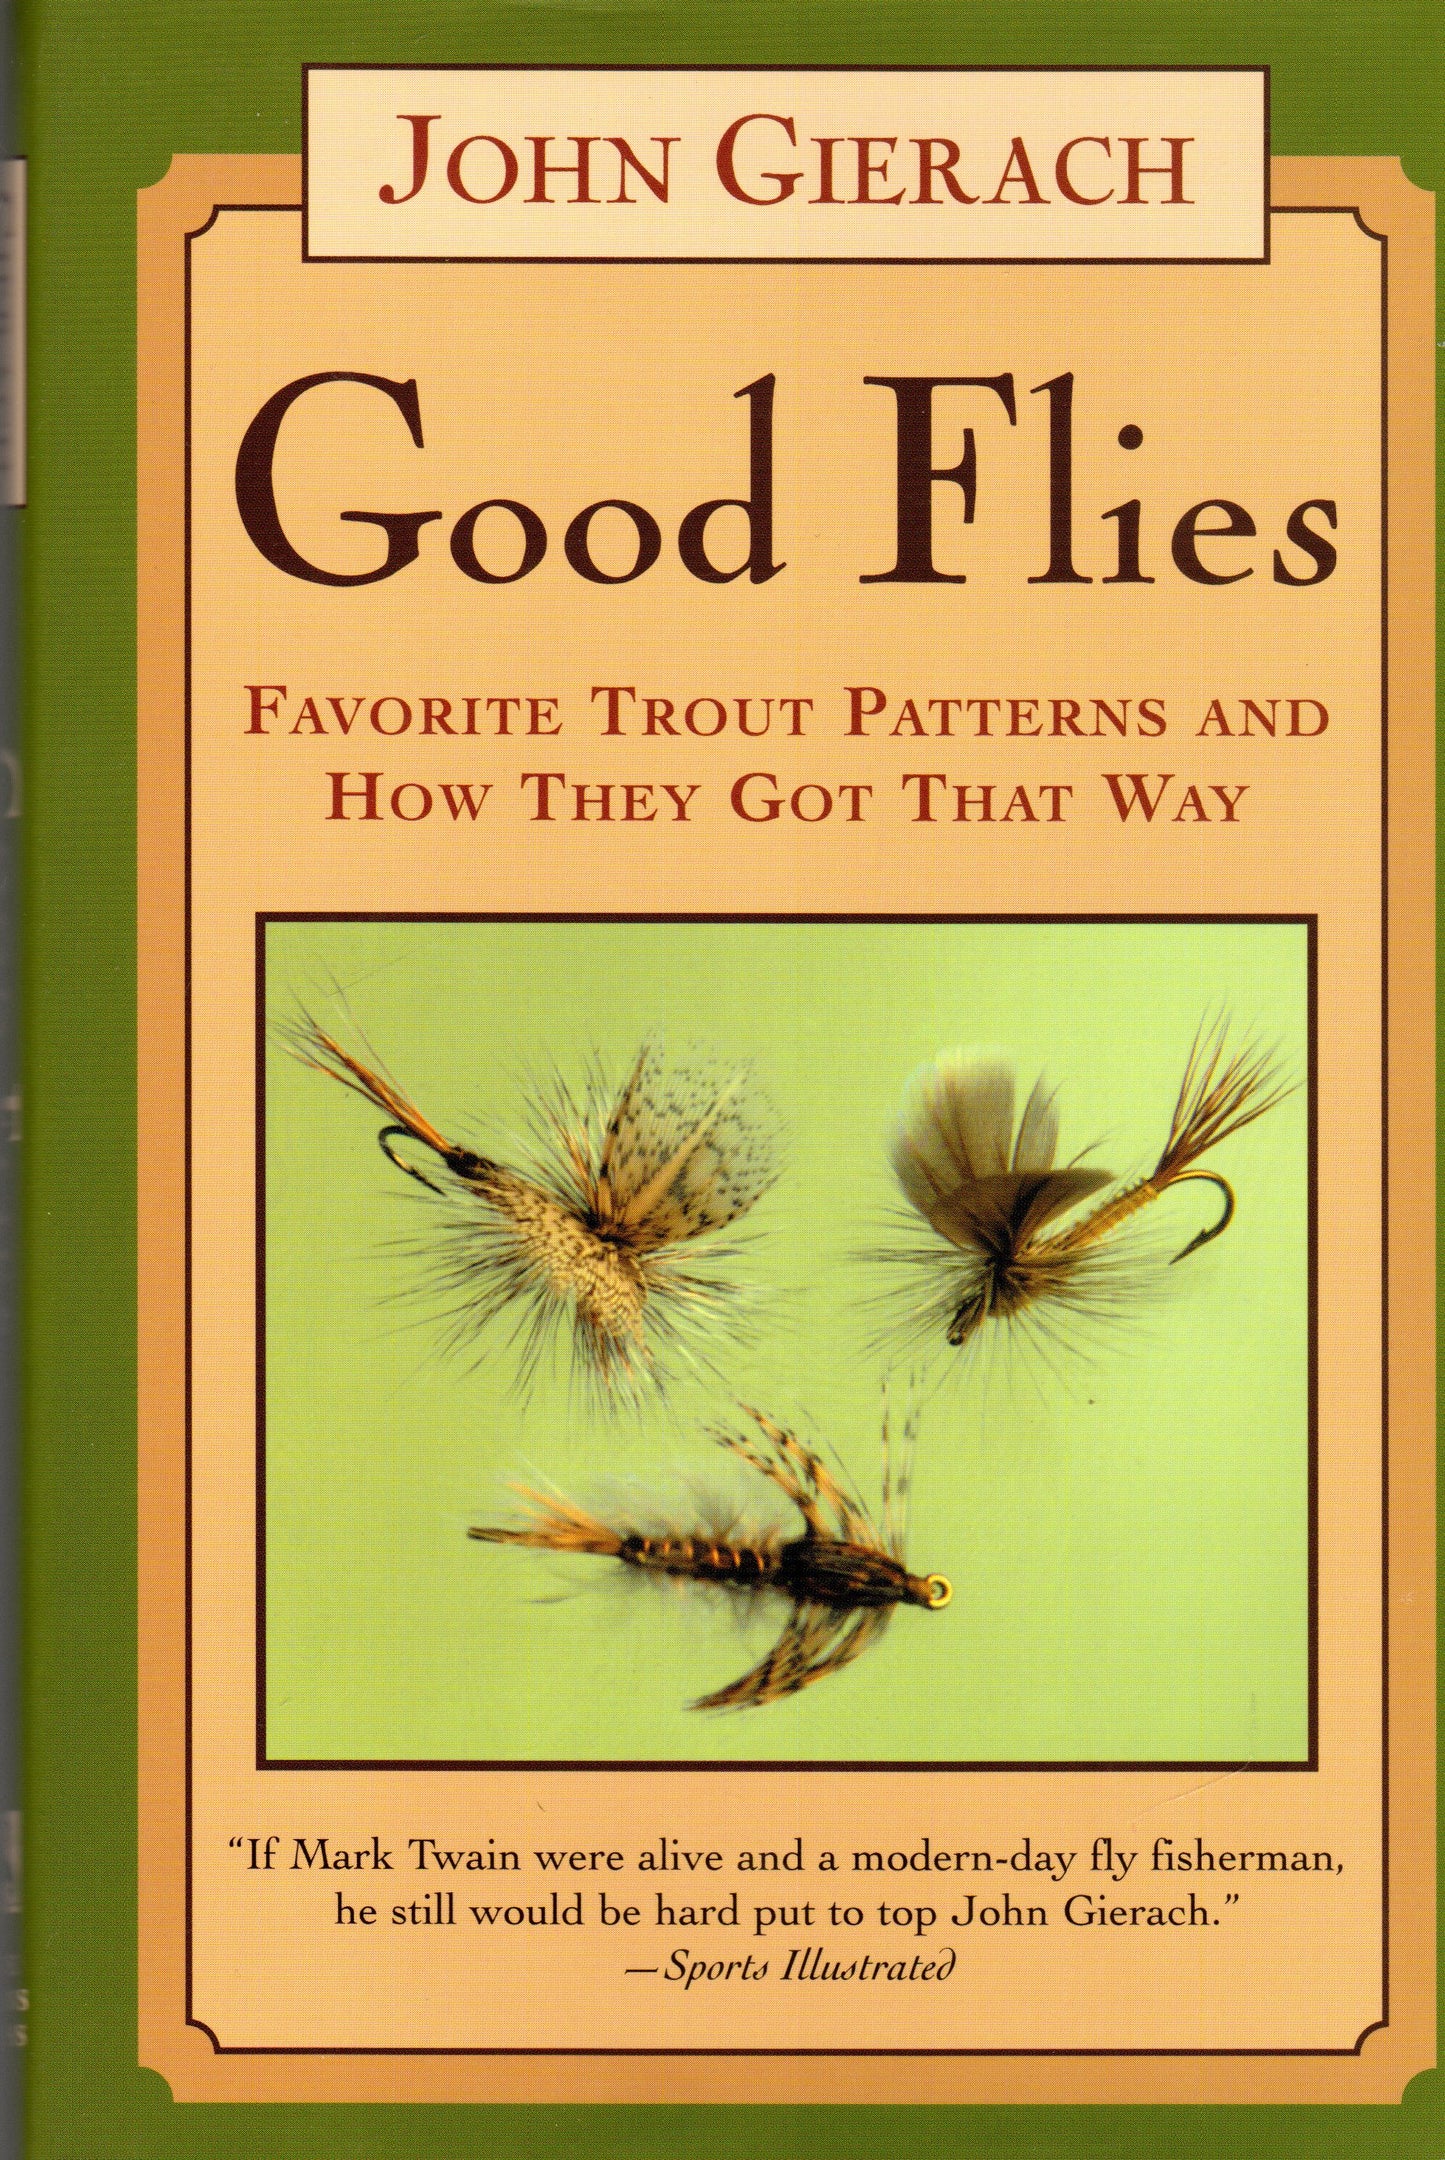 Good Flies: {Favorite Trout Patterns and How They Got That Way}by John Gierach